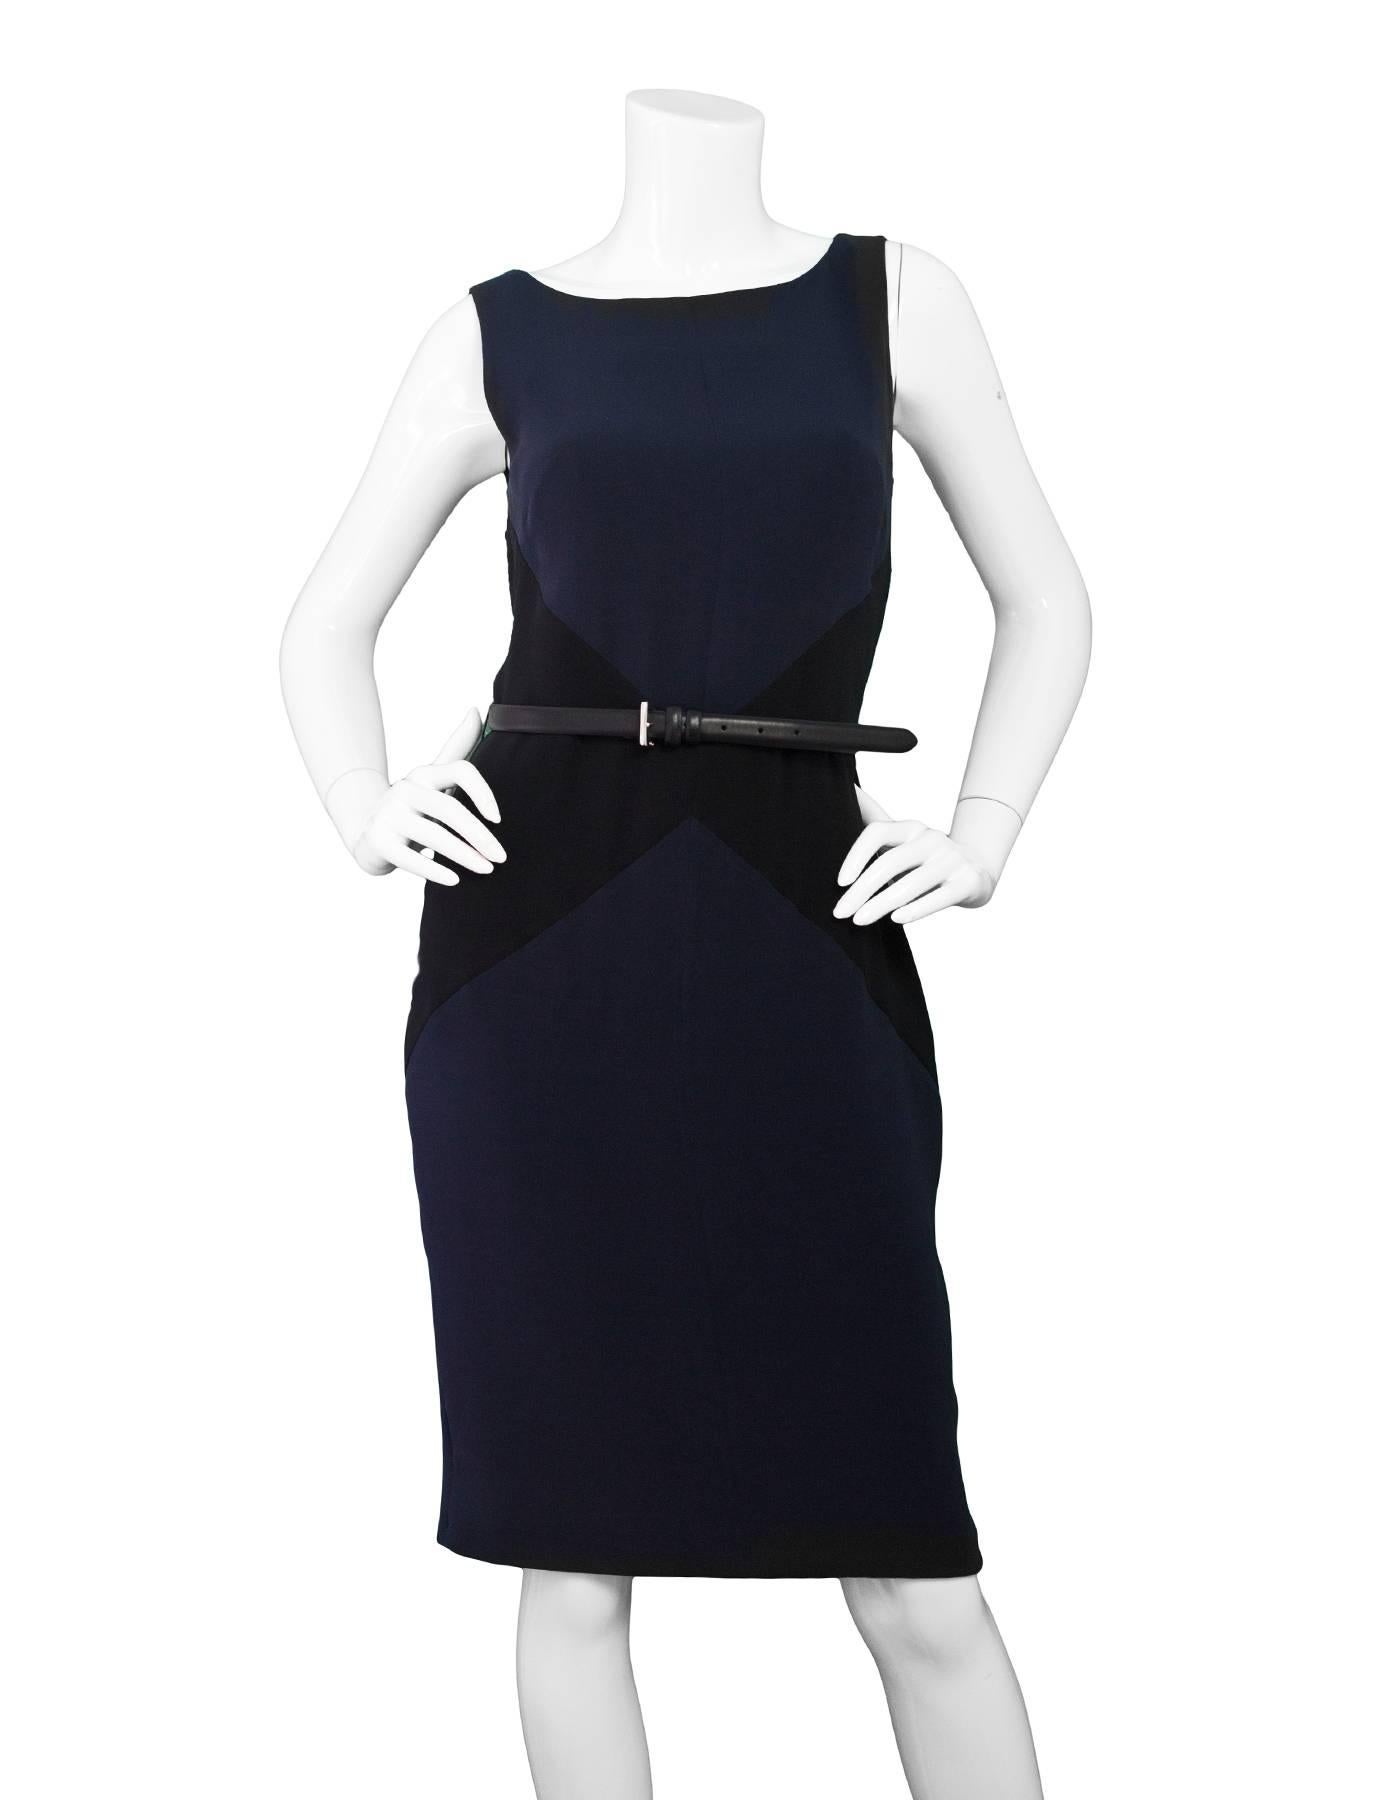 Christian Dior Navy & Black Silk Sheath Dress Sz 6

Made In: Italy
Color: Navy, black
Composition: 95% silk, 5% Elasthan
Lining: Black silk
Closure/Opening: Zip closure at back
Exterior Pockets: None
Interior Pockets: None
Overall Condition: